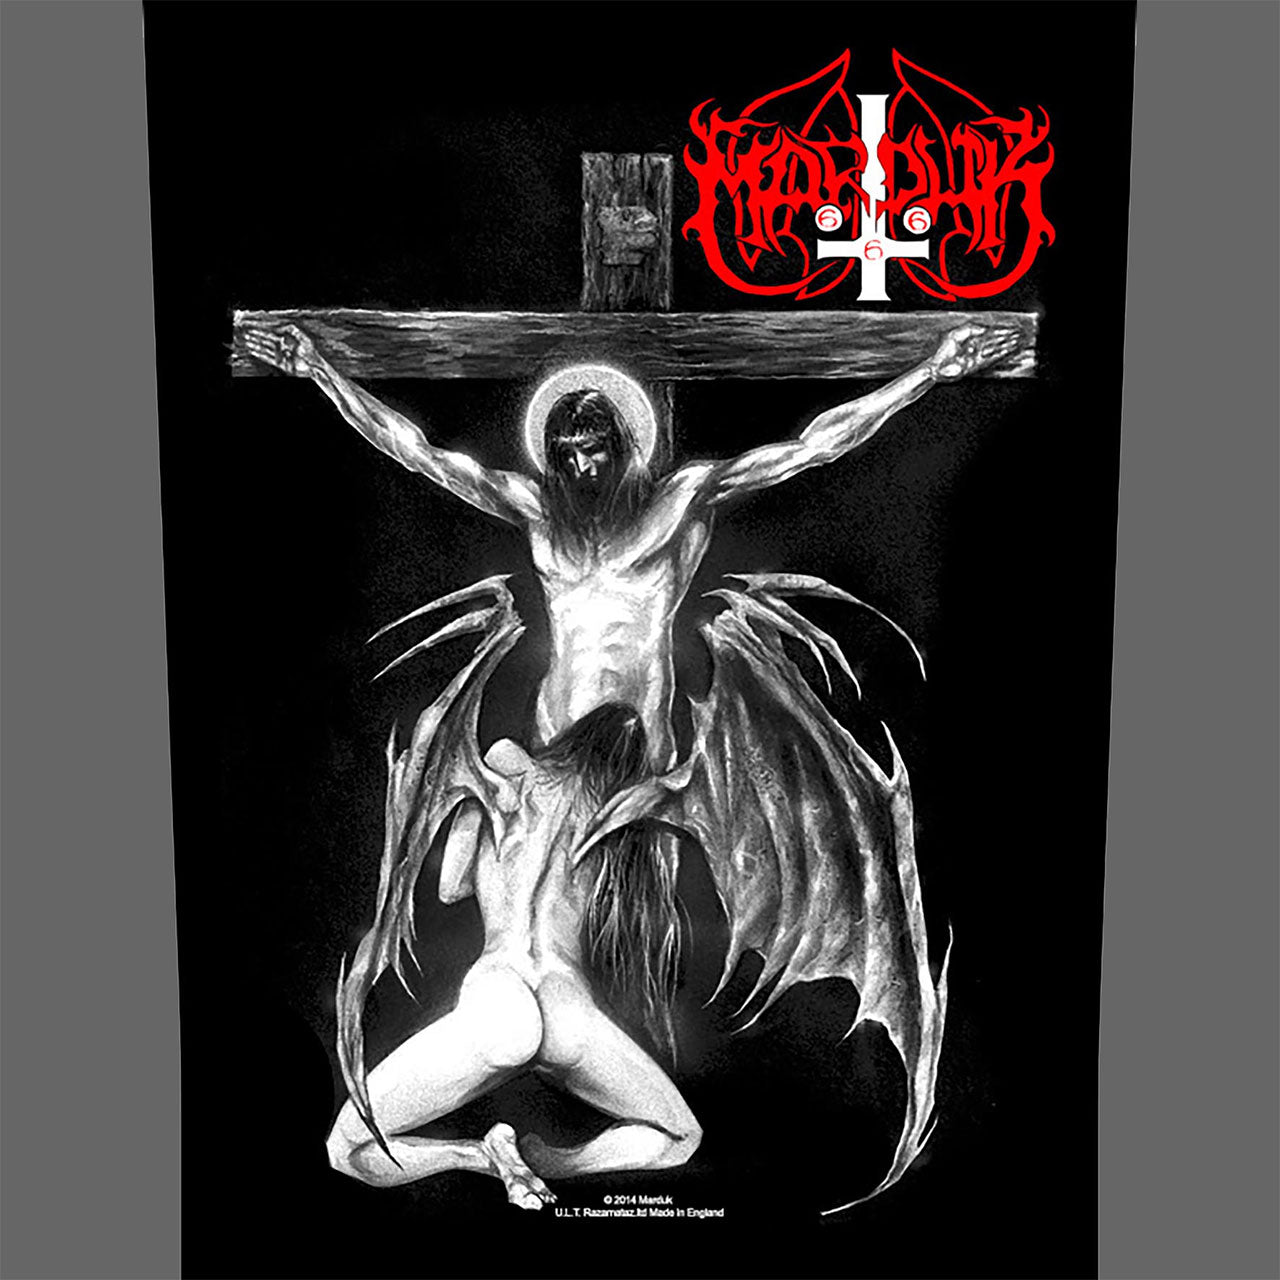 Marduk - Christraping Black Metal (Backpatch)